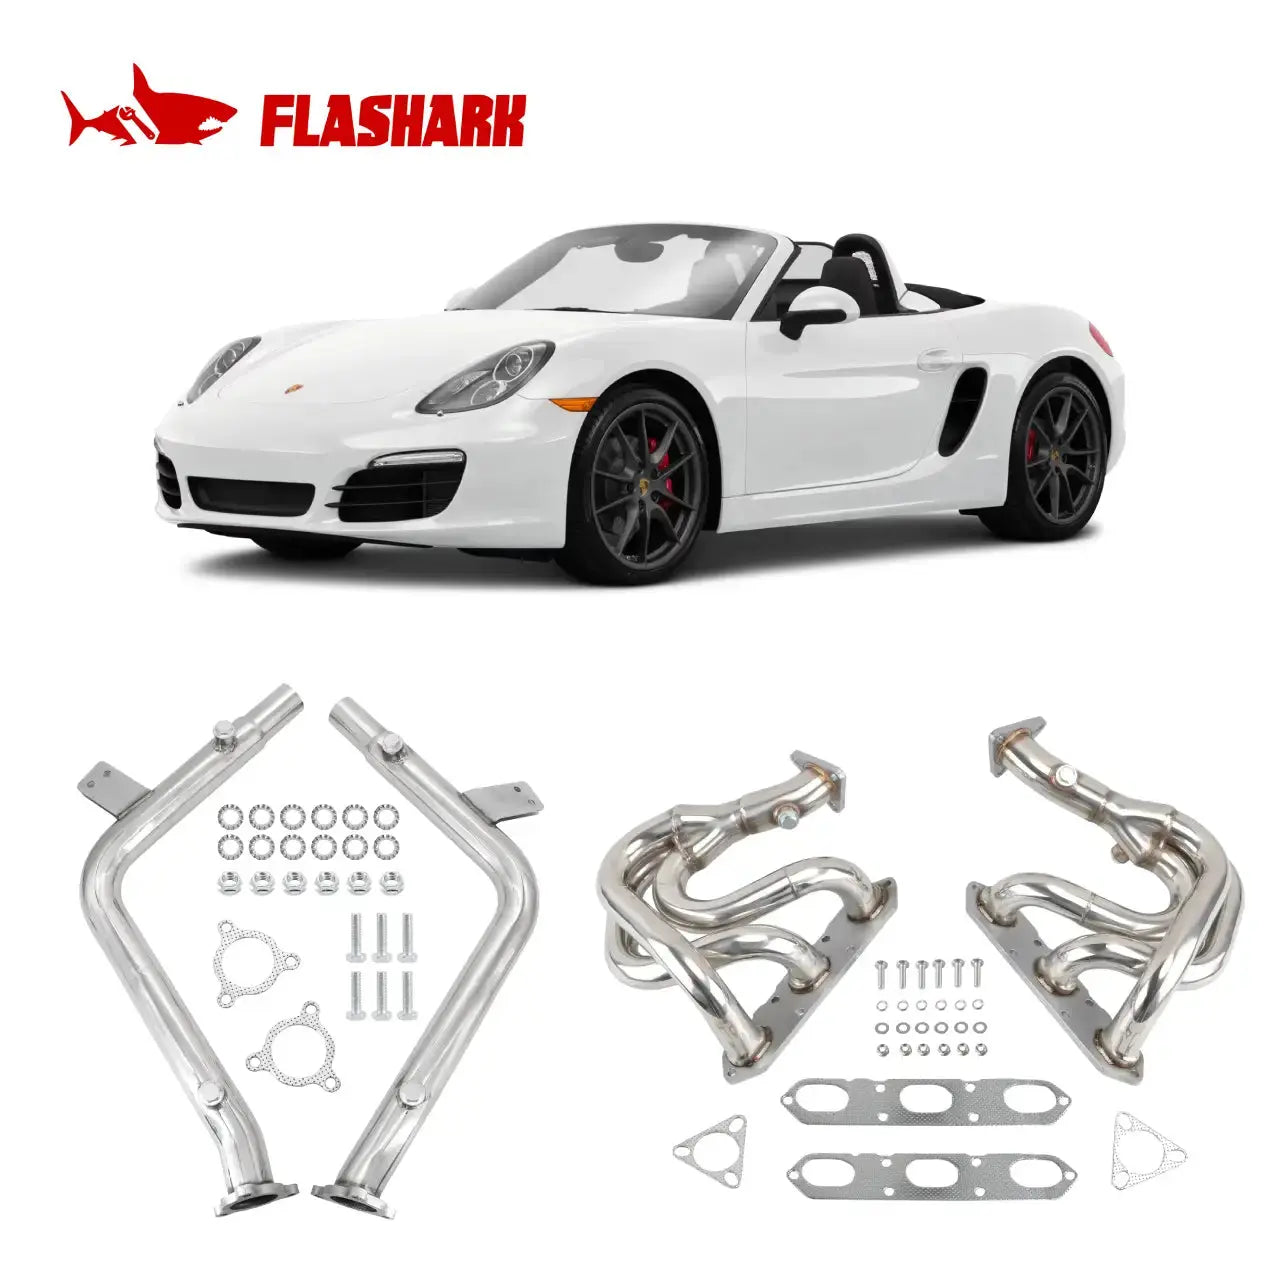 Exhaust Header/Downpipe Exhaust All-In-One Kit for 2000-2004 Porsche Boxster 986 2.7L / 3.2L Flashark